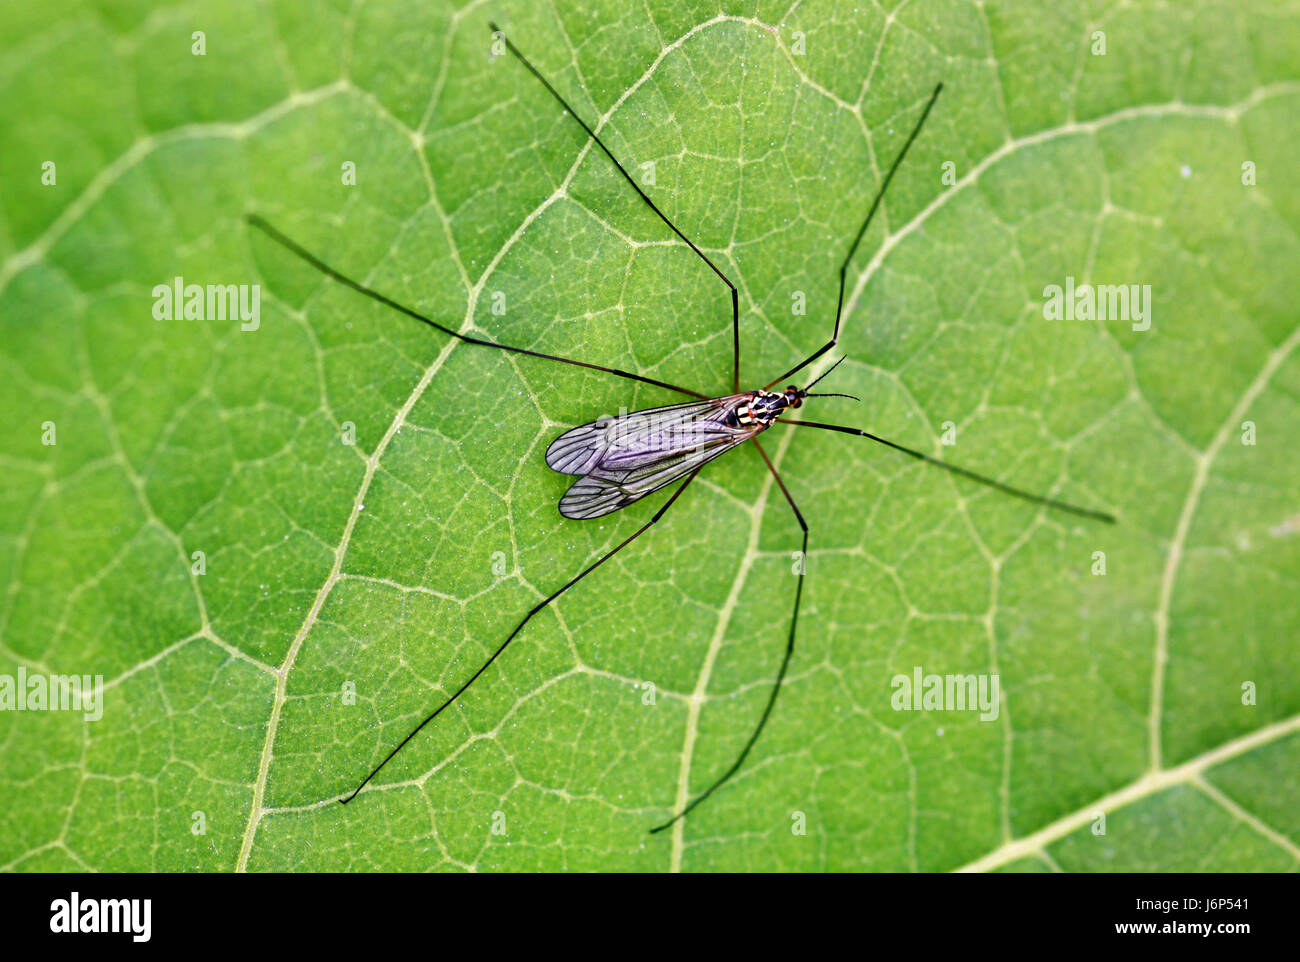 legs spotted cranefly legs insect spotted cranefly leggy wiesenschnake Stock Photo